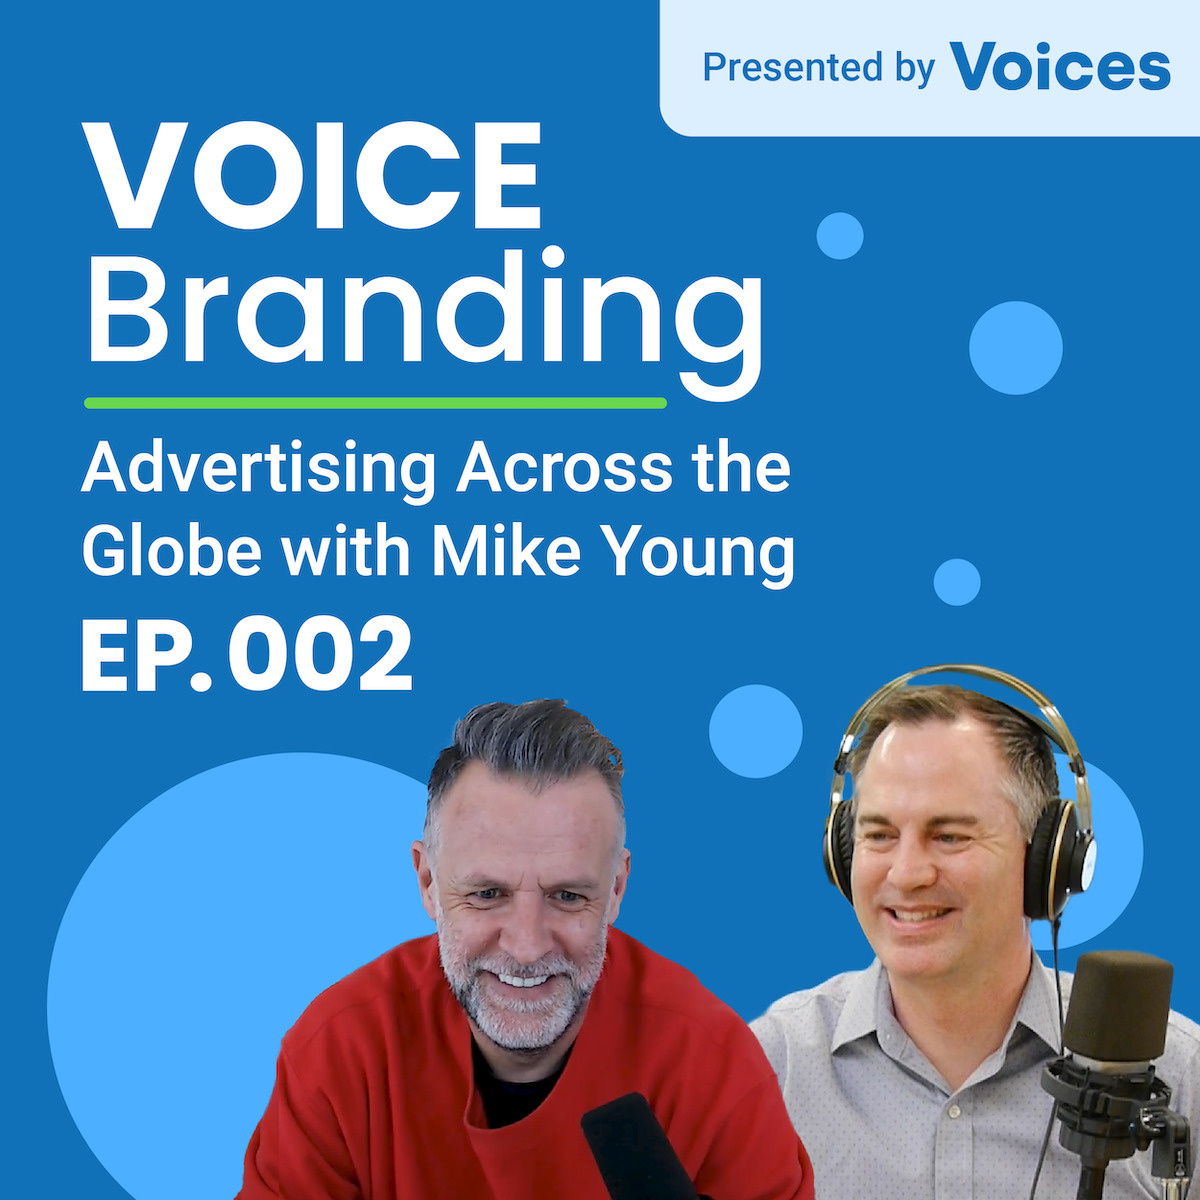 New Voice Branding Audio Industry Podcast Interviews Mike Young Studio Head